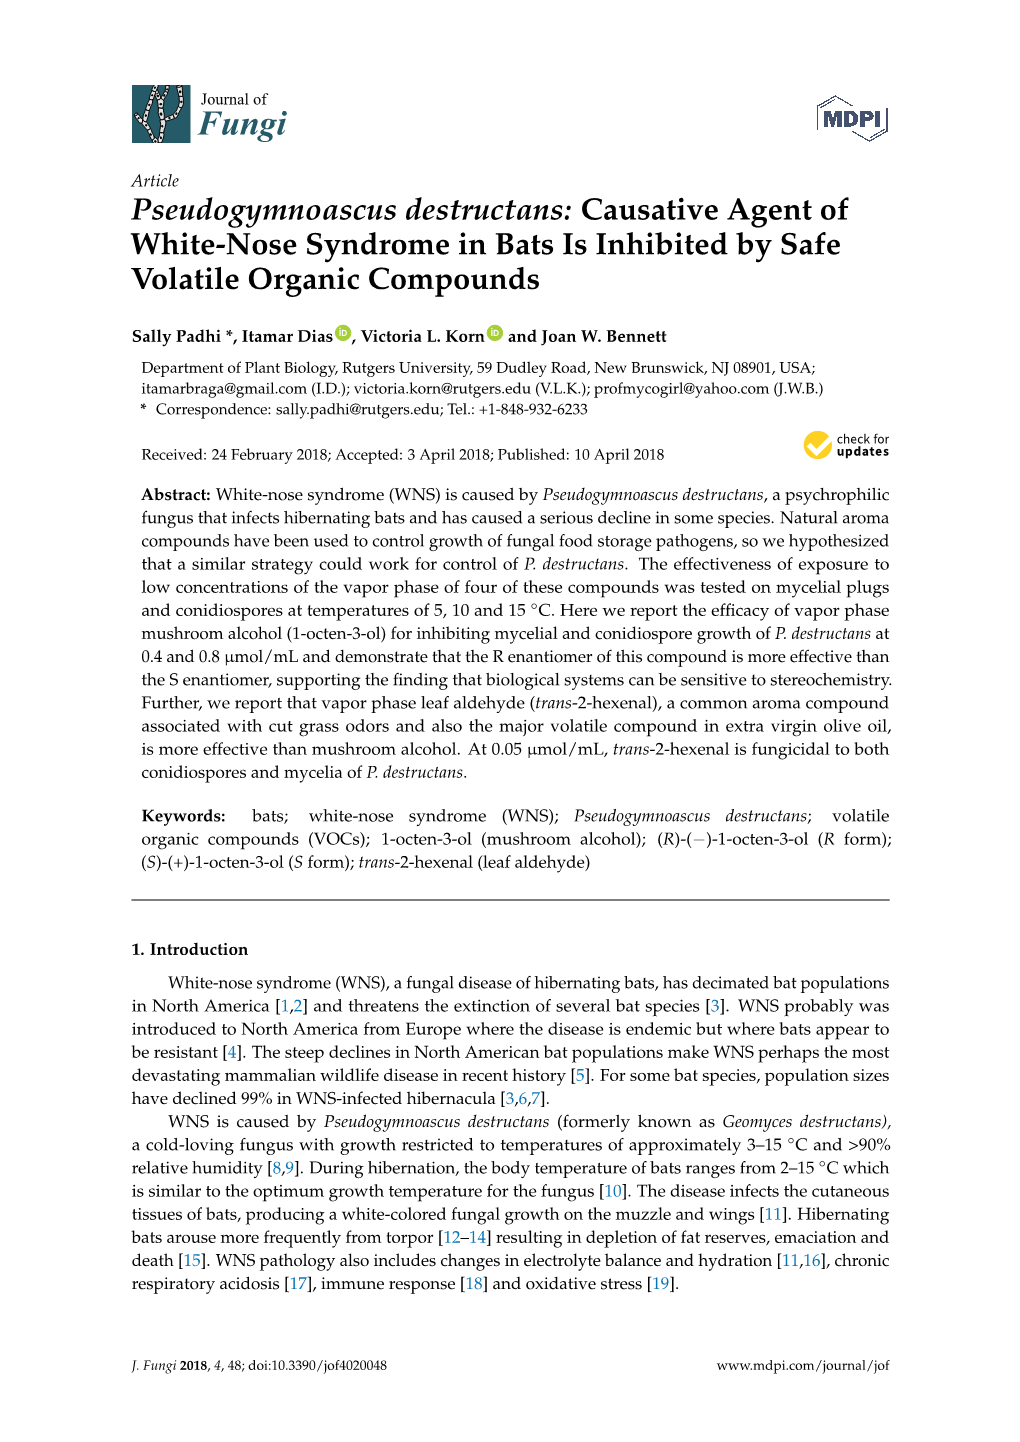 Pseudogymnoascus Destructans: Causative Agent of White-Nose Syndrome in Bats Is Inhibited by Safe Volatile Organic Compounds